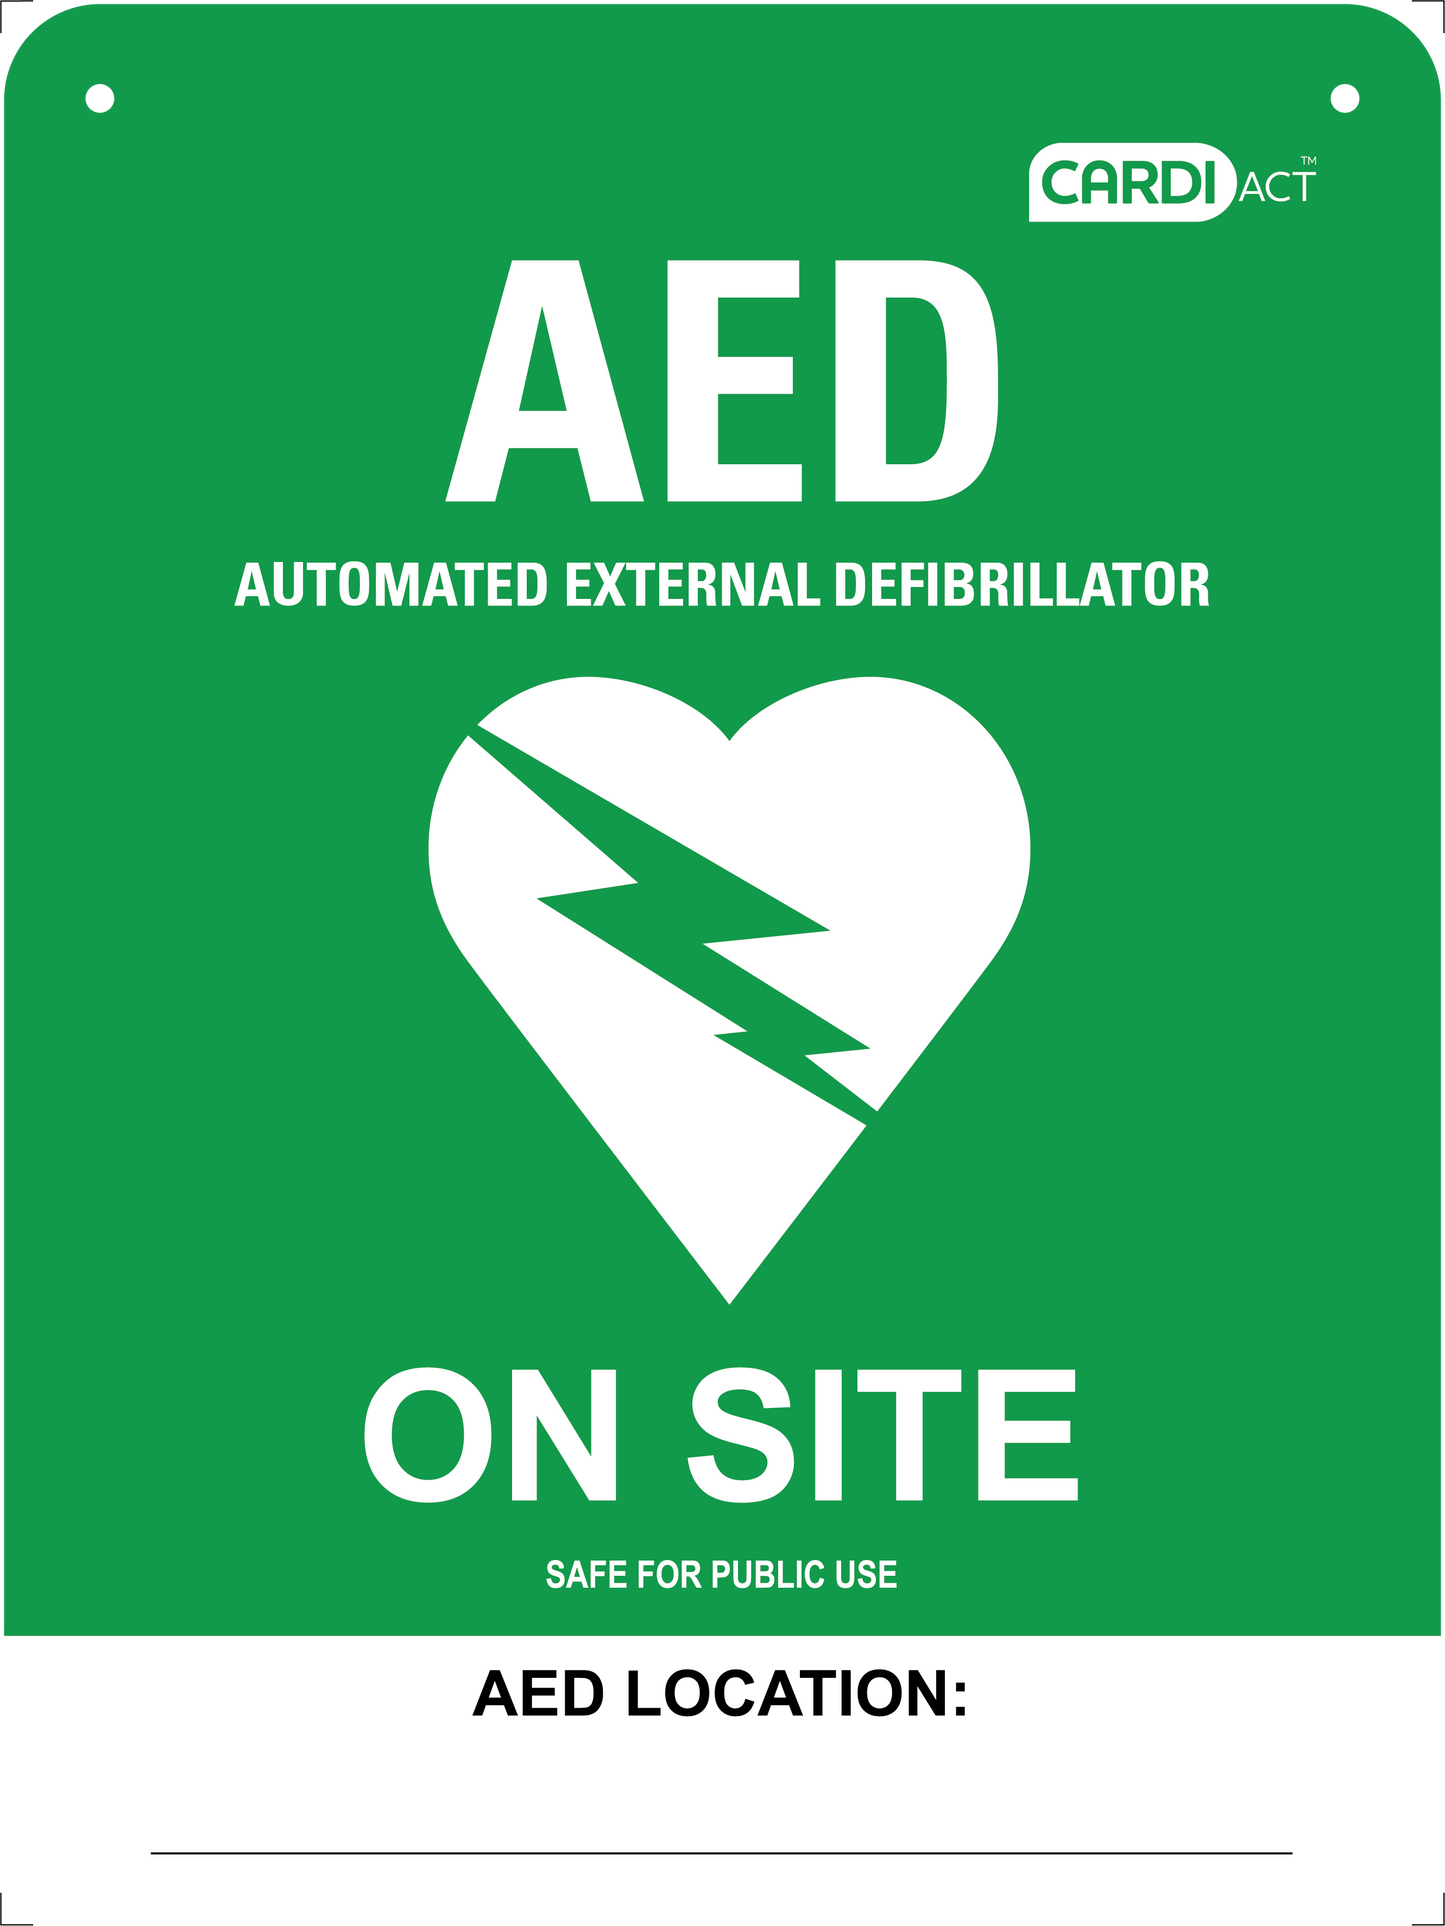 CARDIACT Poly AED On Site Sign 22.5 x 30cm